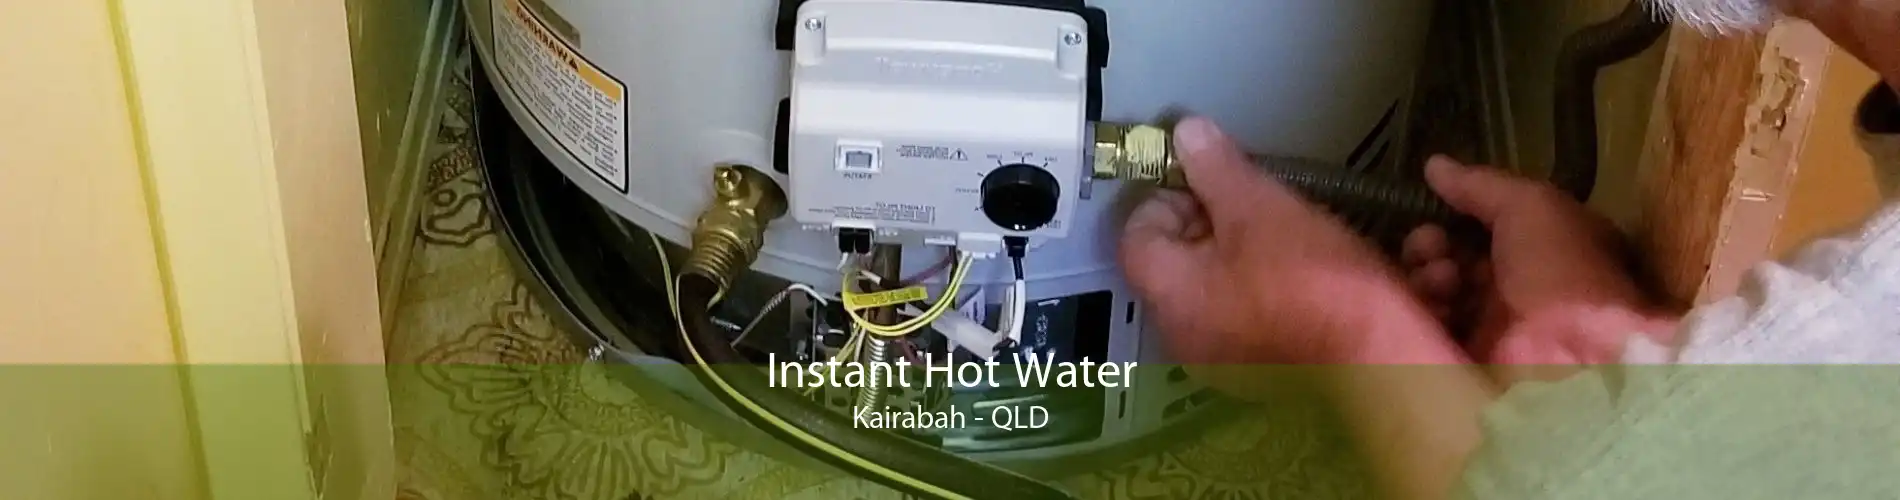 Instant Hot Water Kairabah - QLD